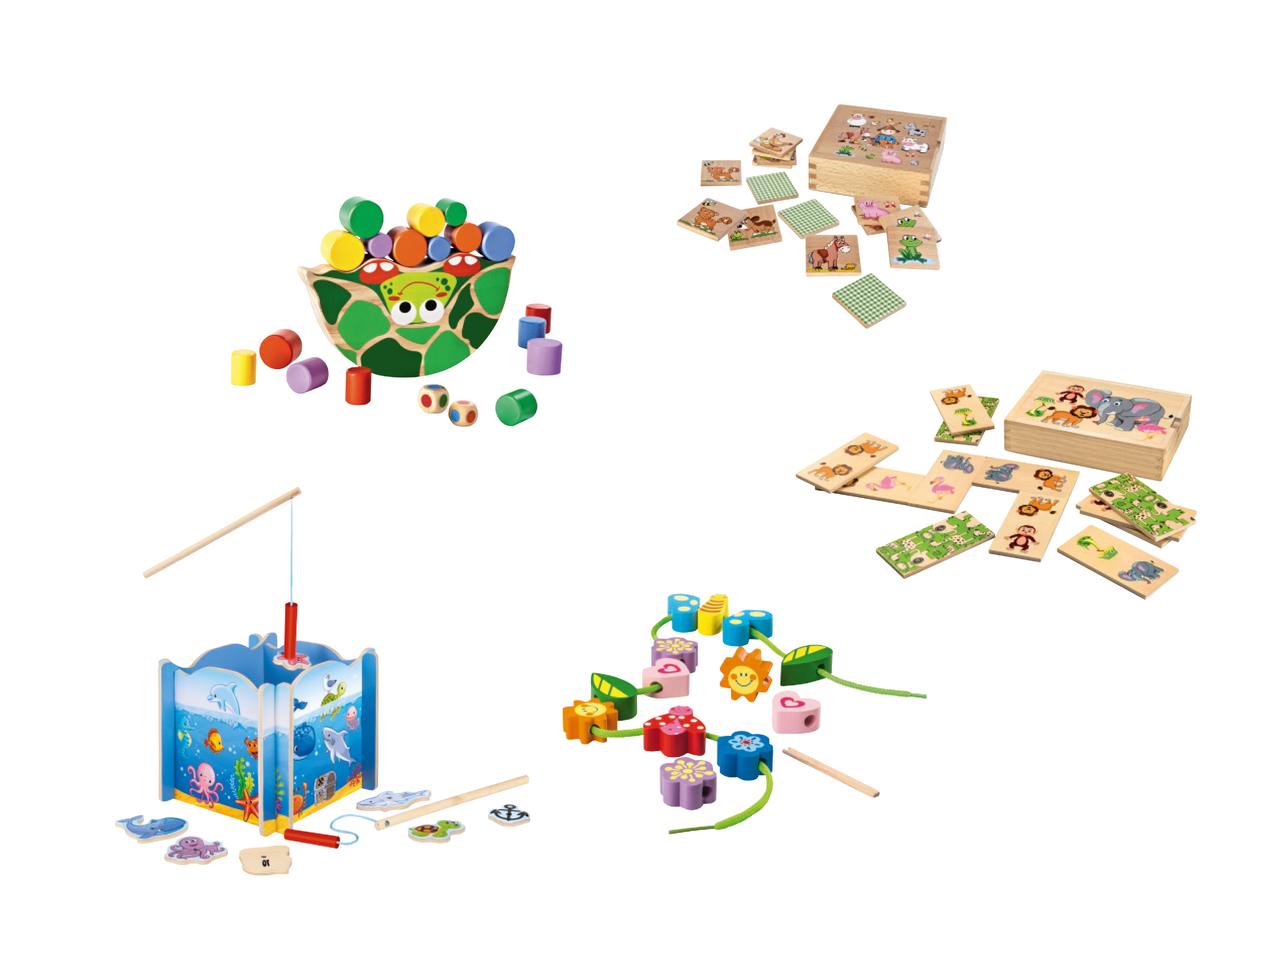 PLAYTIVE JUNIOR(R) Wooden Toys and Games